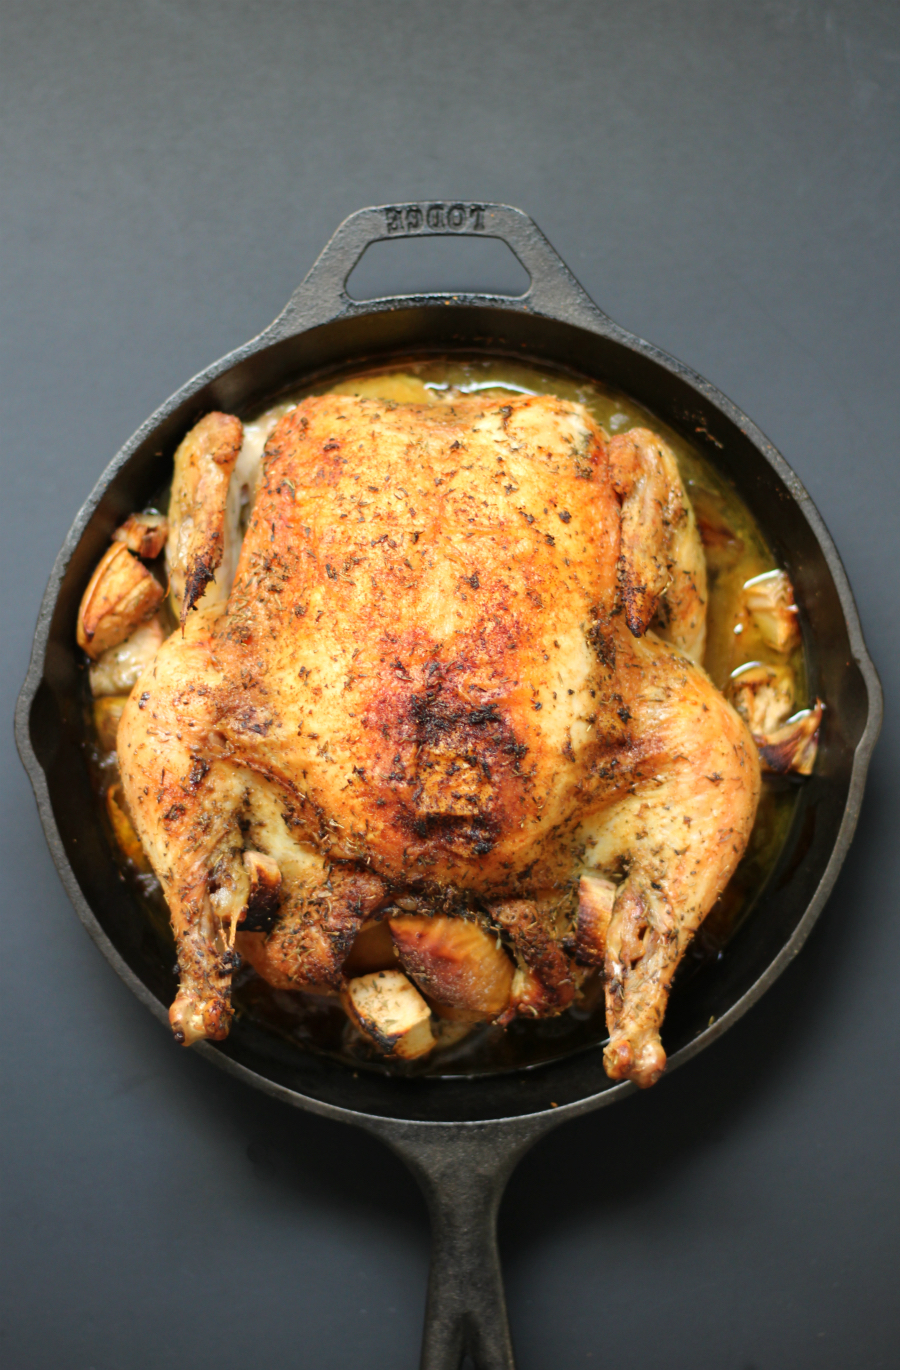 Easy Cast Iron Whole Roasted Chicken (Gluten-Free, Paleo) | Strength and Sunshine @RebeccaGF666 A simple and easy cast iron whole roasted chicken that's full of flavor, perfectly moist and tender, and just waiting to be served at the dinner table! This recipe is gluten-free, allergy-free, and paleo using a no-fail method for success!